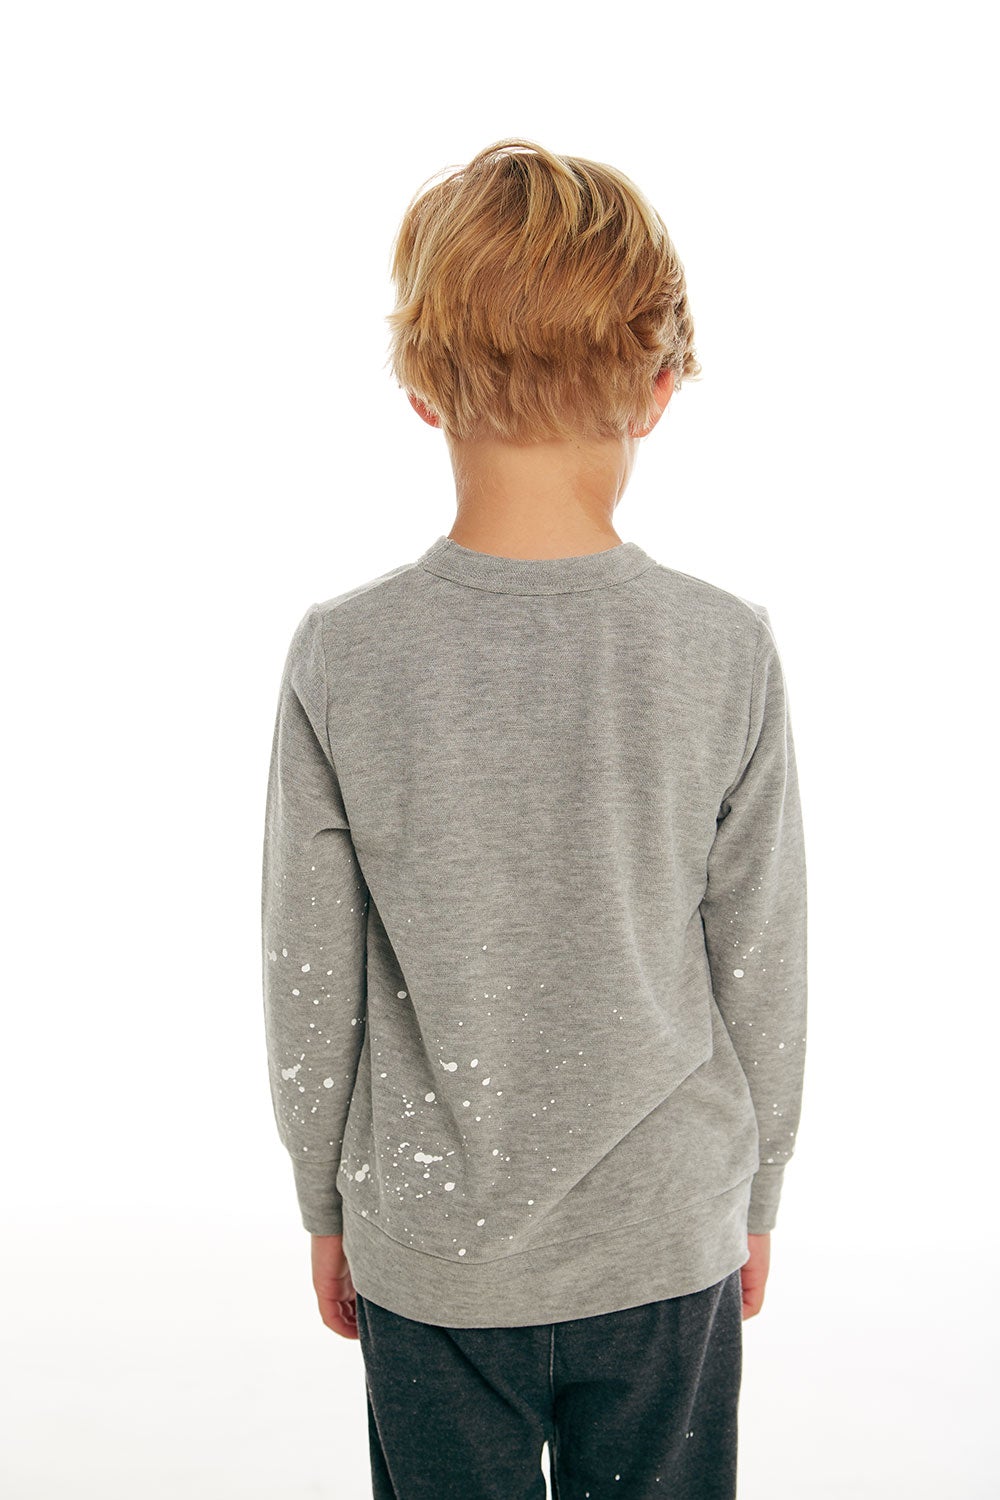 Chaser Boy's Cozy Knit Pullover - STAR WARS™️ (Size 4, 5, 6)